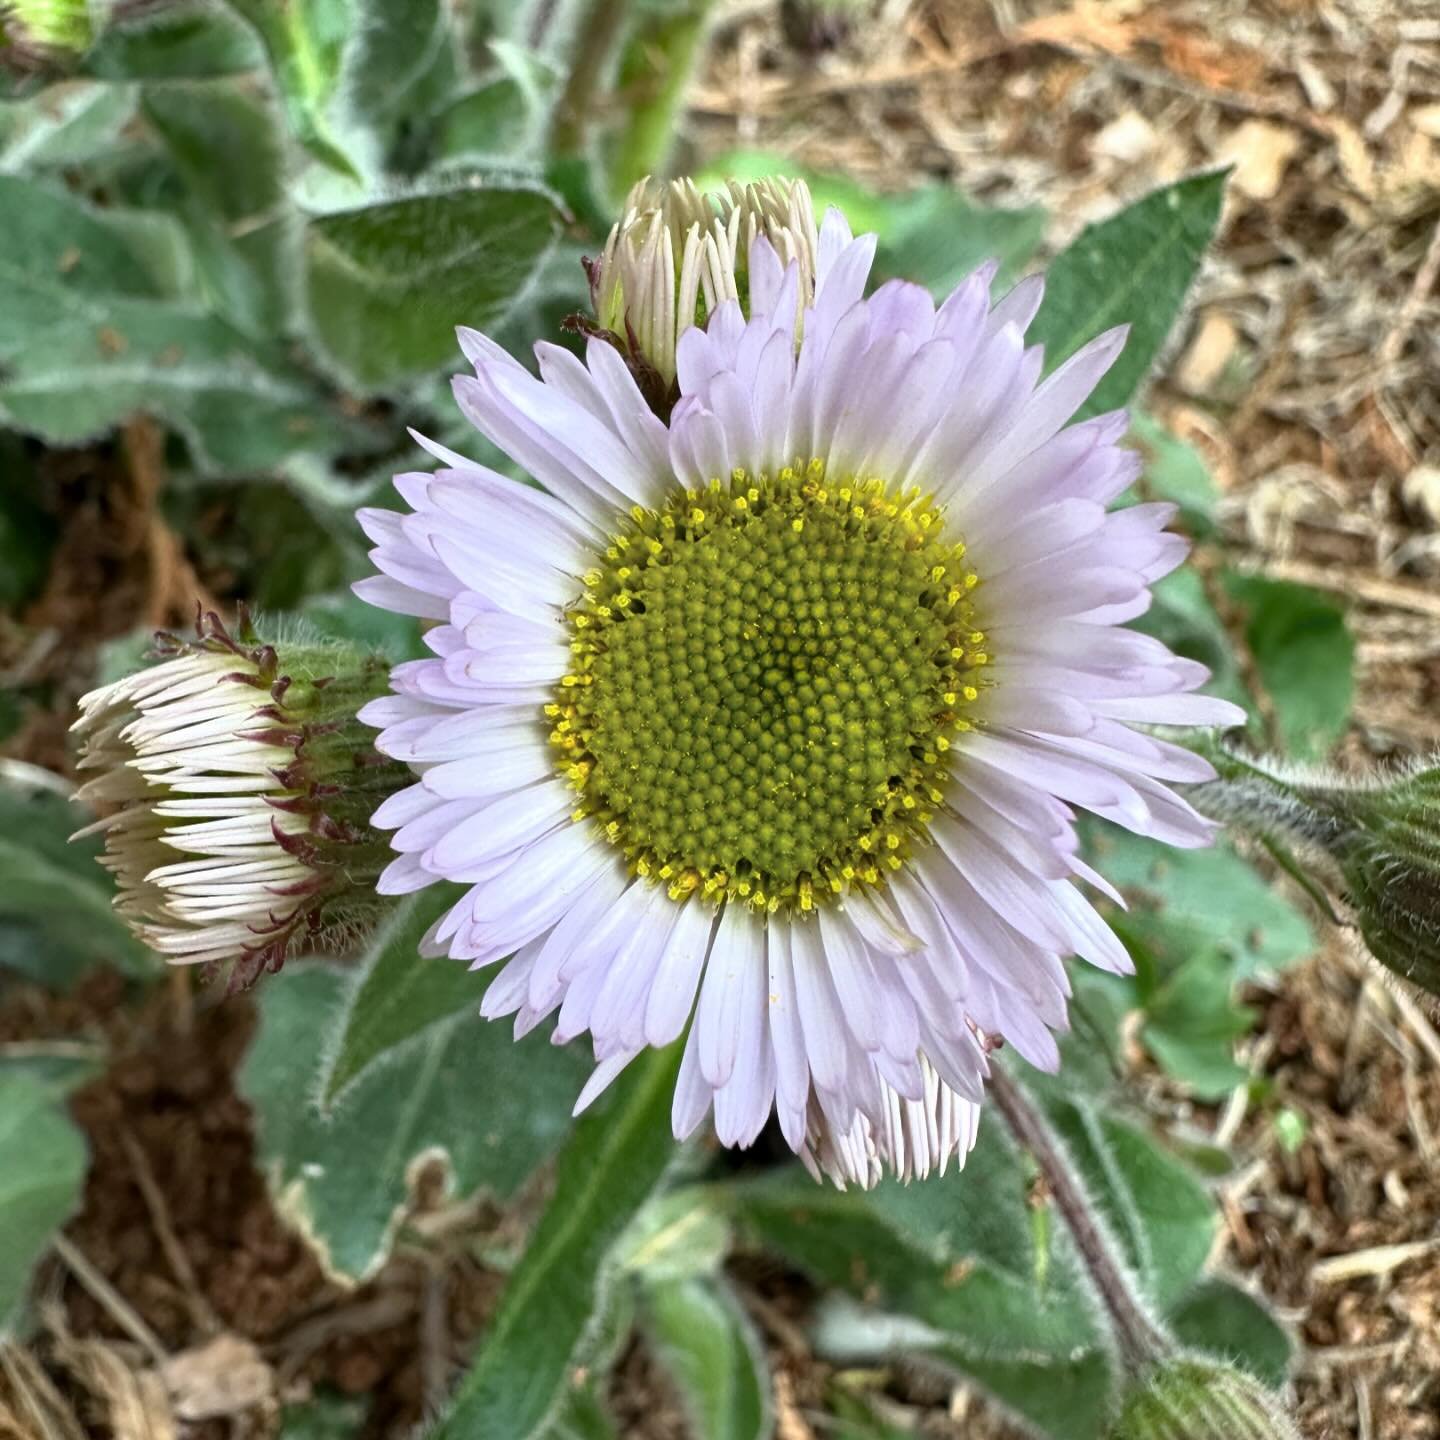 The first flower to emerge this year in our garden (besides the violets!) is Erigeron pulchellus &lsquo;Lynnhaven Carpet&rsquo;. This sweet, fuzzy groundcover stays 6-12&rdquo; tall and usually blooms May to June.  These particular plants are in a su